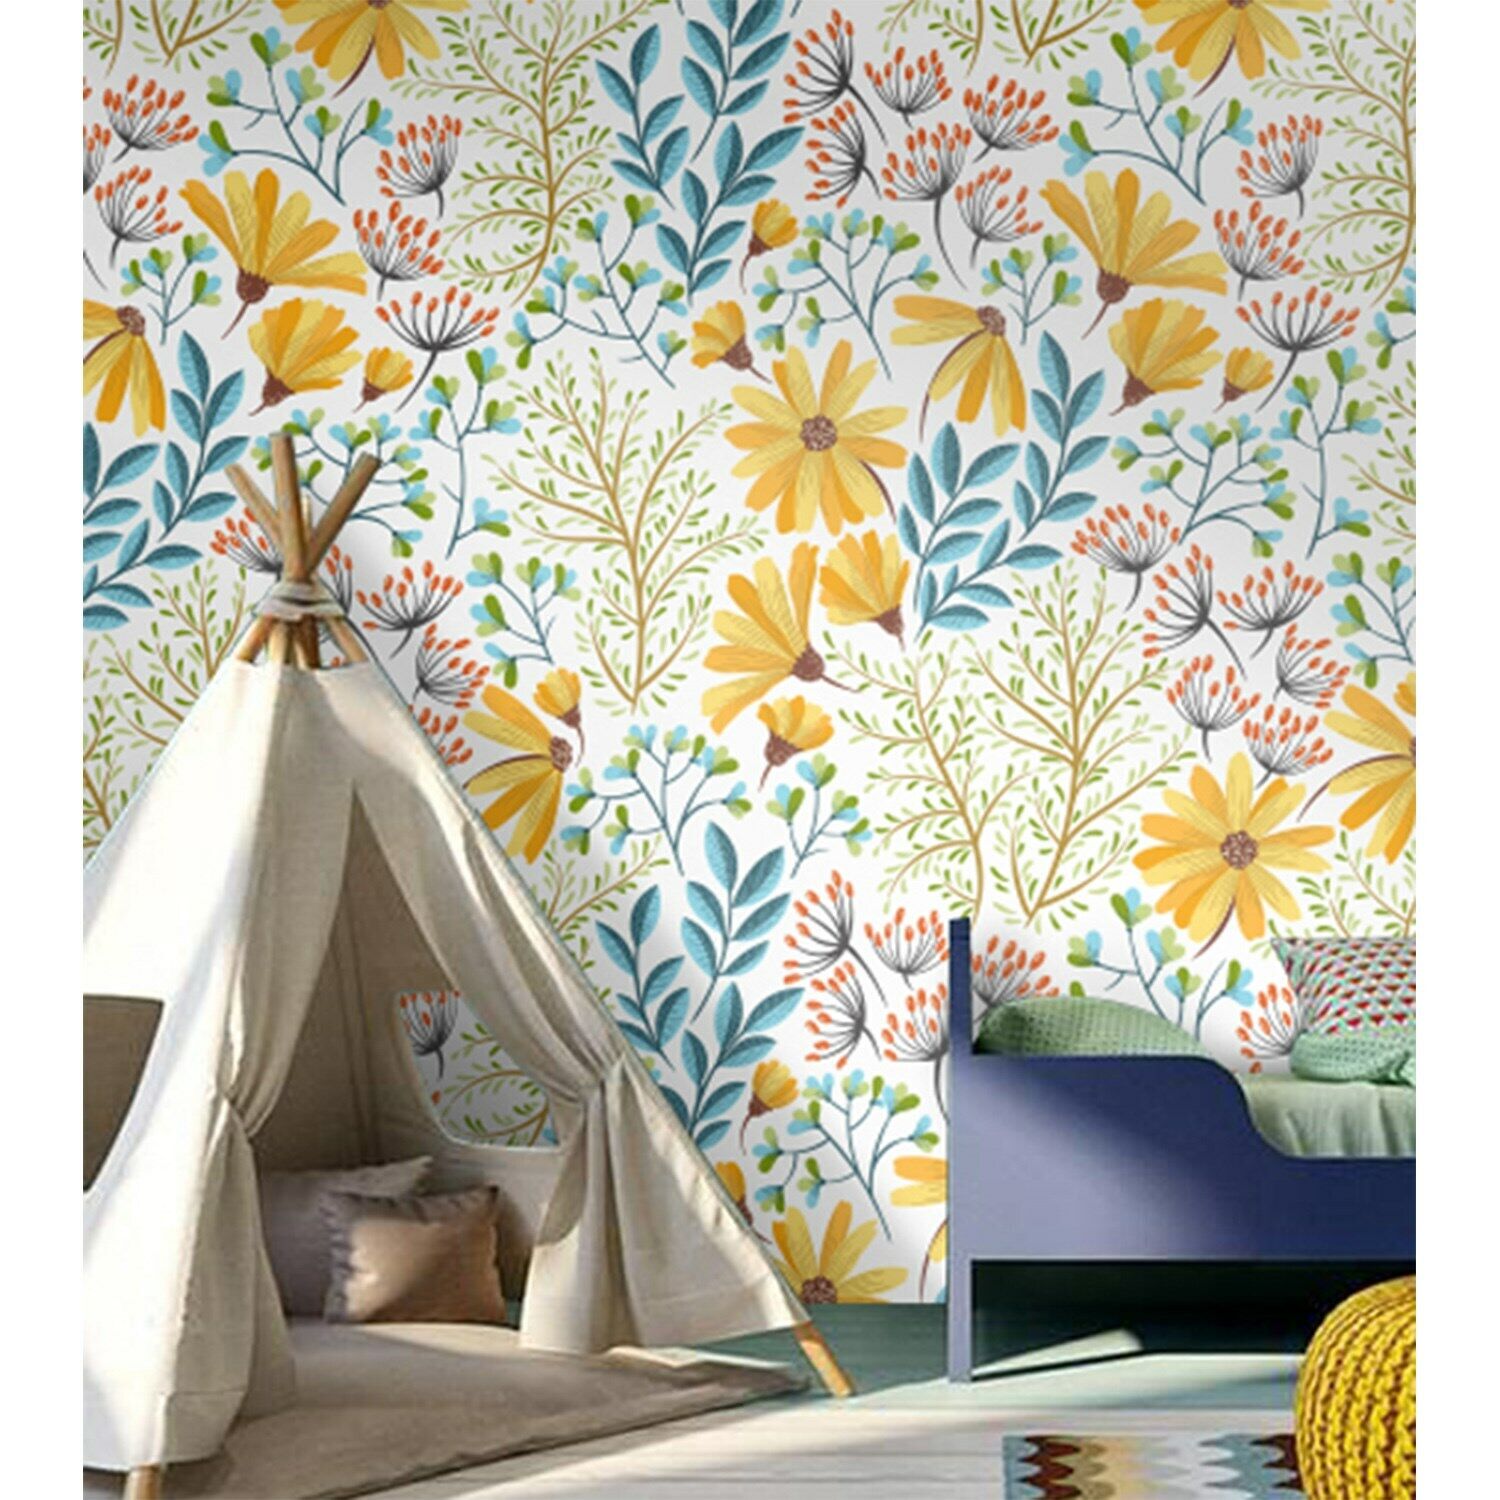 Non-Woven wallpaper bohemian spring floral Stylish Vintage style Home Mural